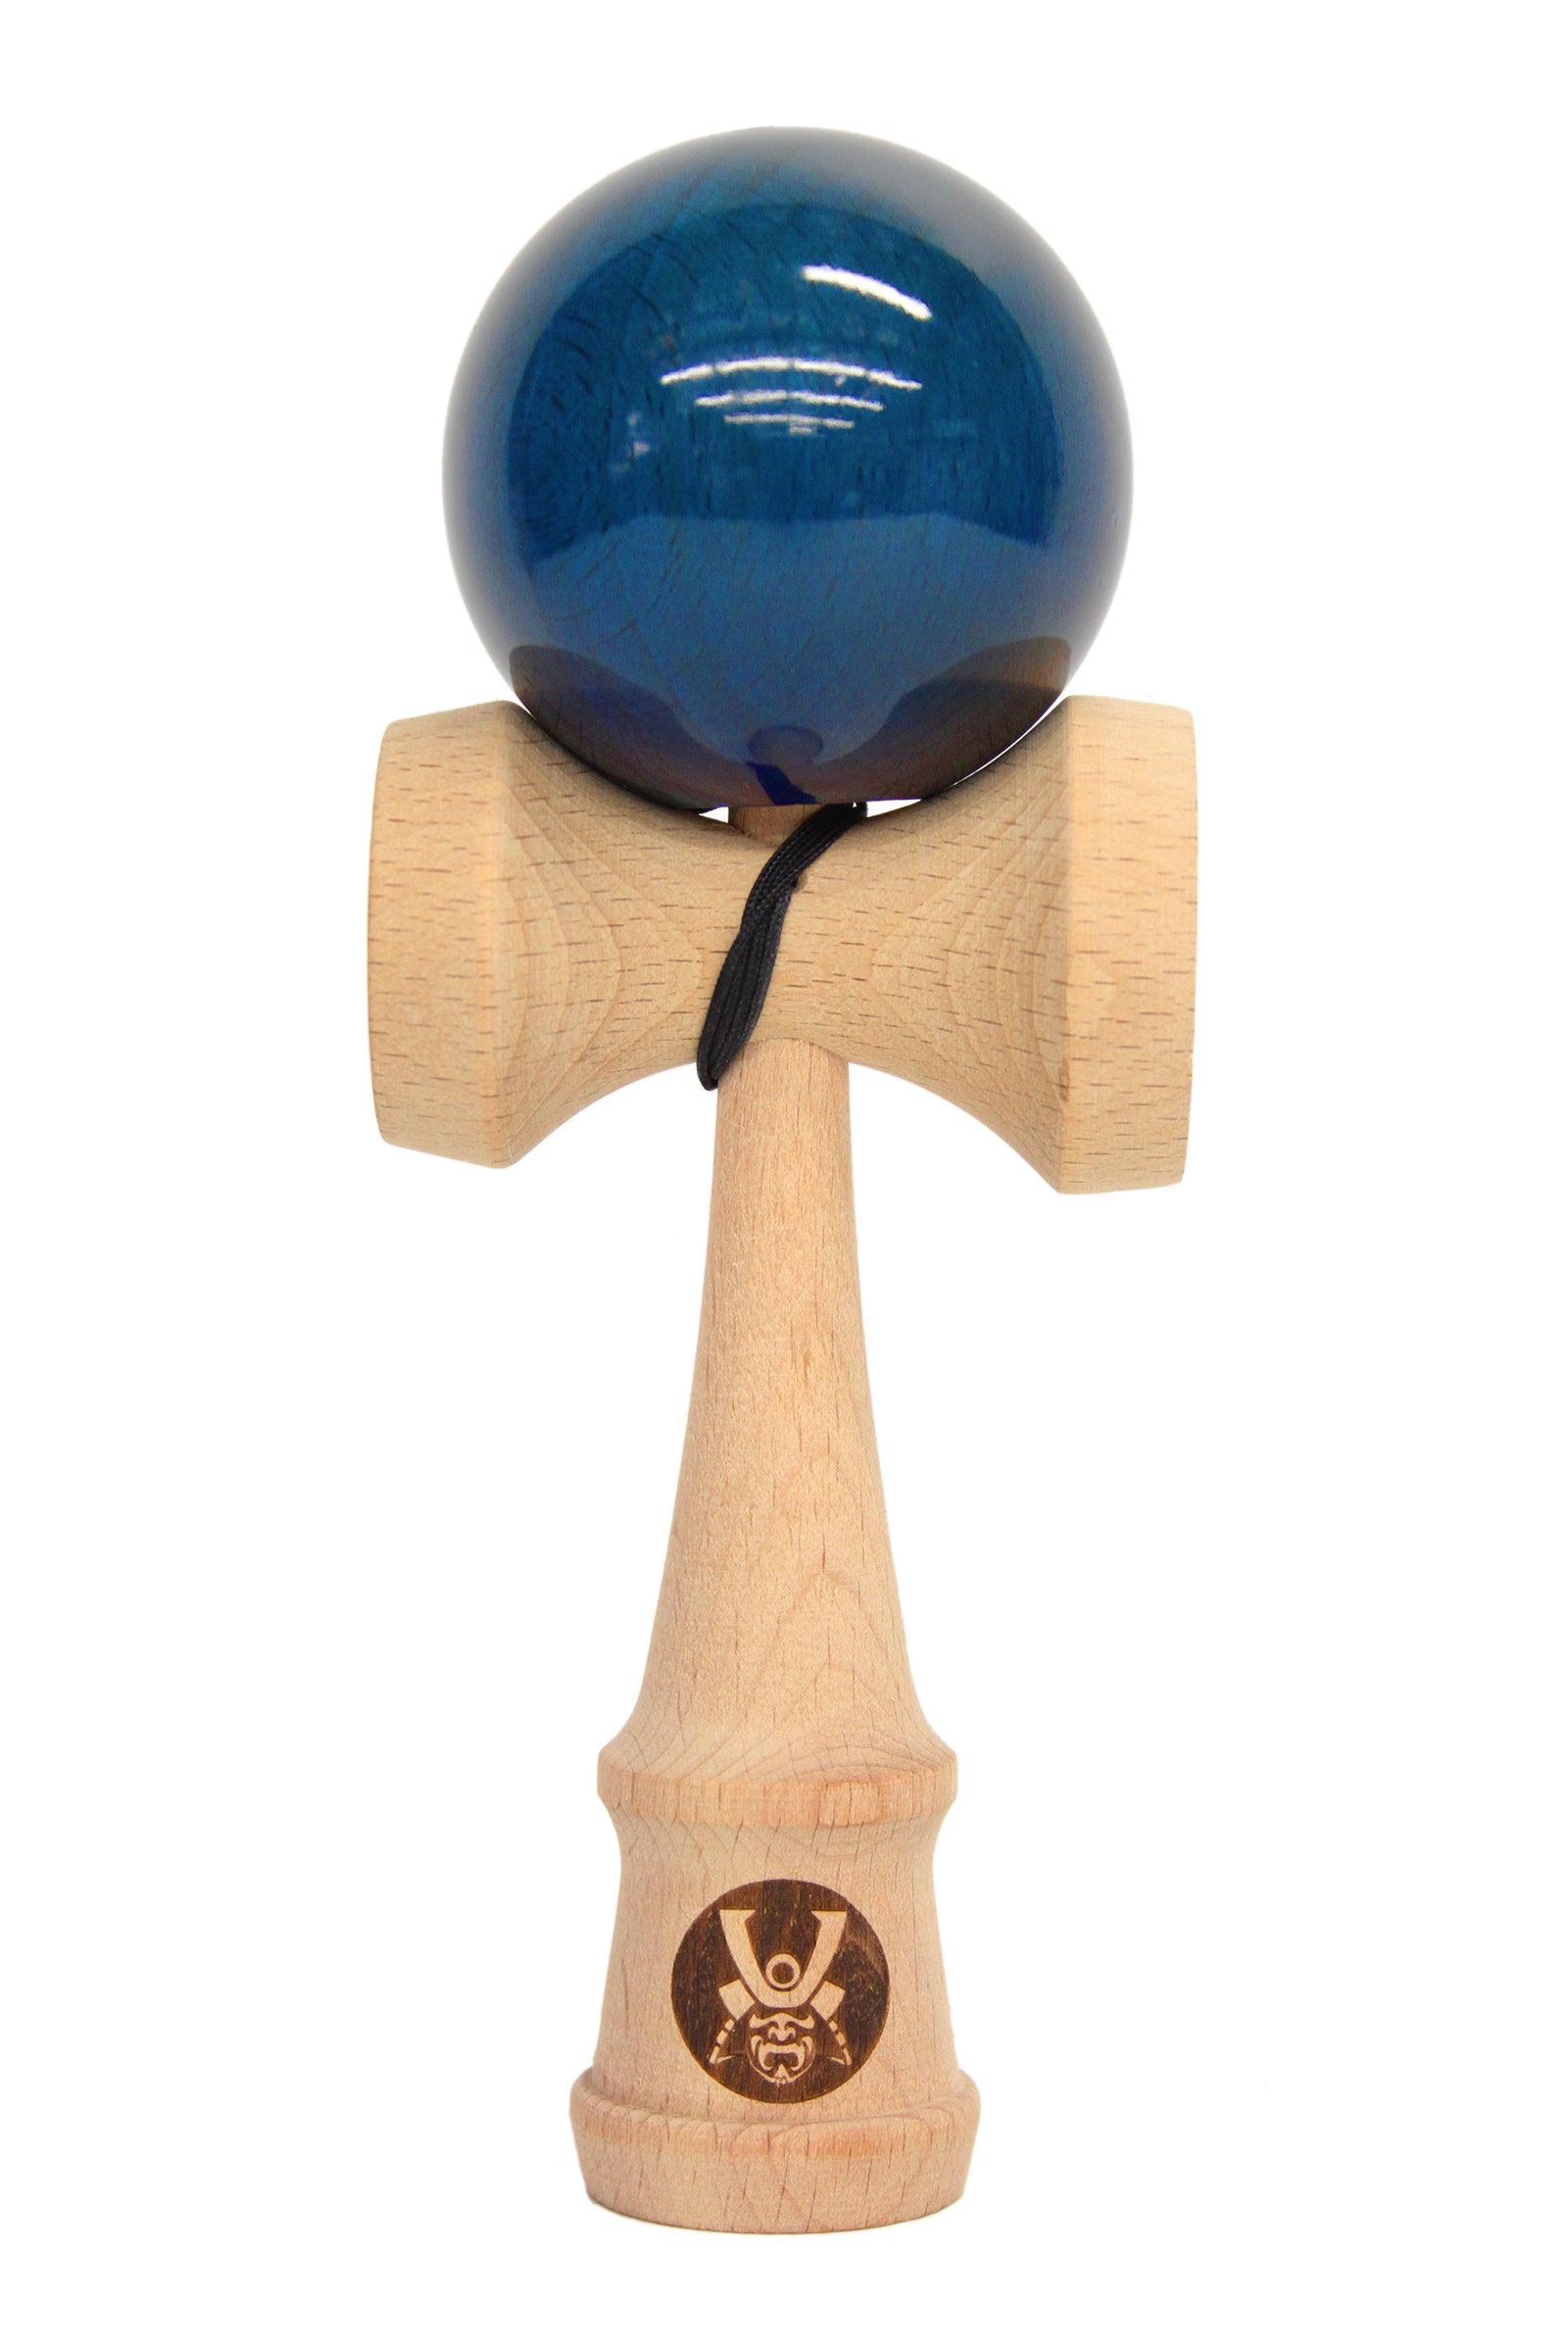 Bushido Kendama Wooden Ball and Cup Game – BrainStormProducts LLC